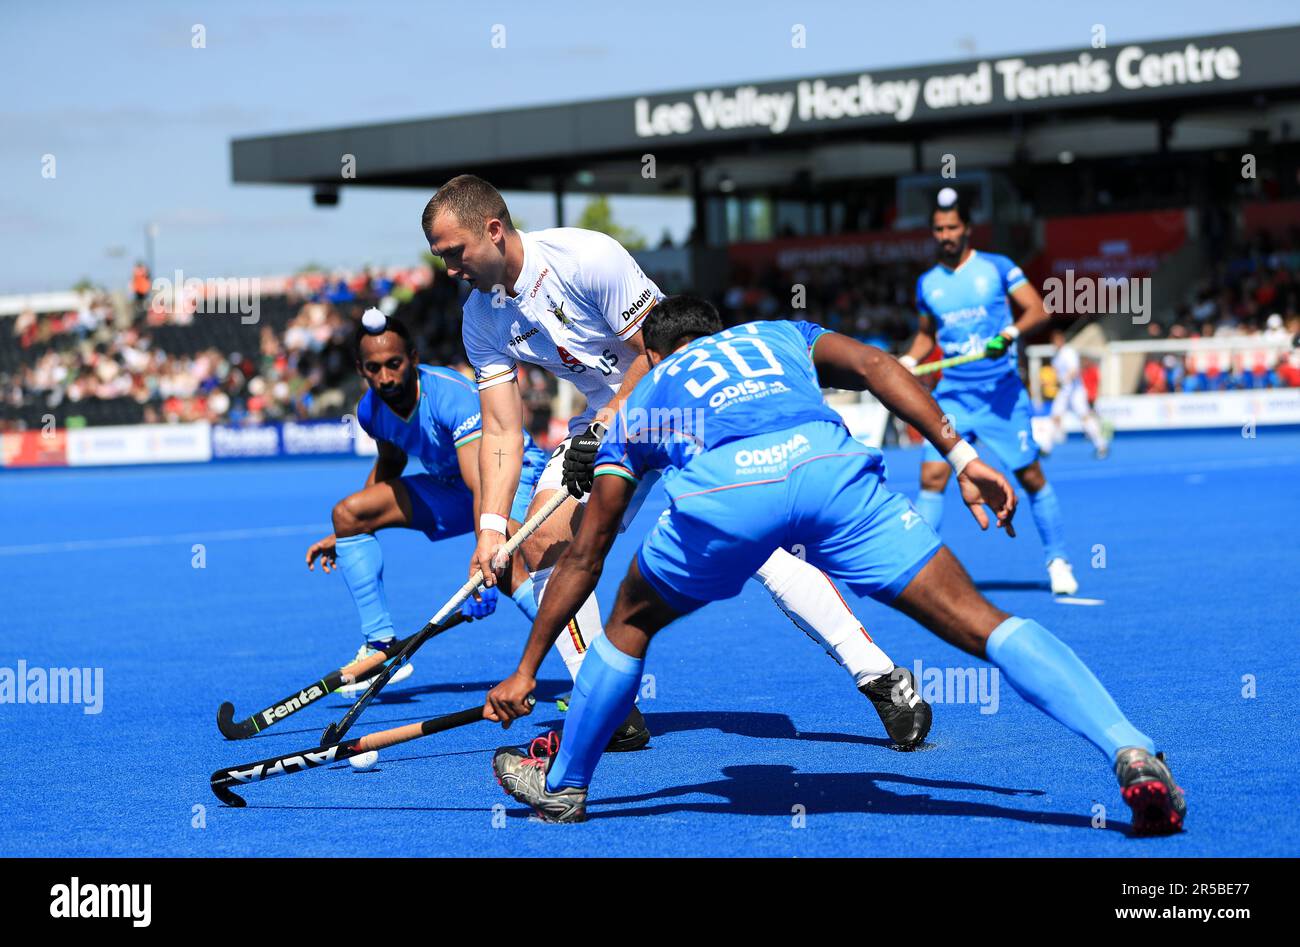 Belgium's Emmanuel Stockbroekx battles with India's Amit Rohidas during the FIH Hockey Pro League match at Lee Valley, London. Picture date: Friday June 2, 2023. Stock Photo